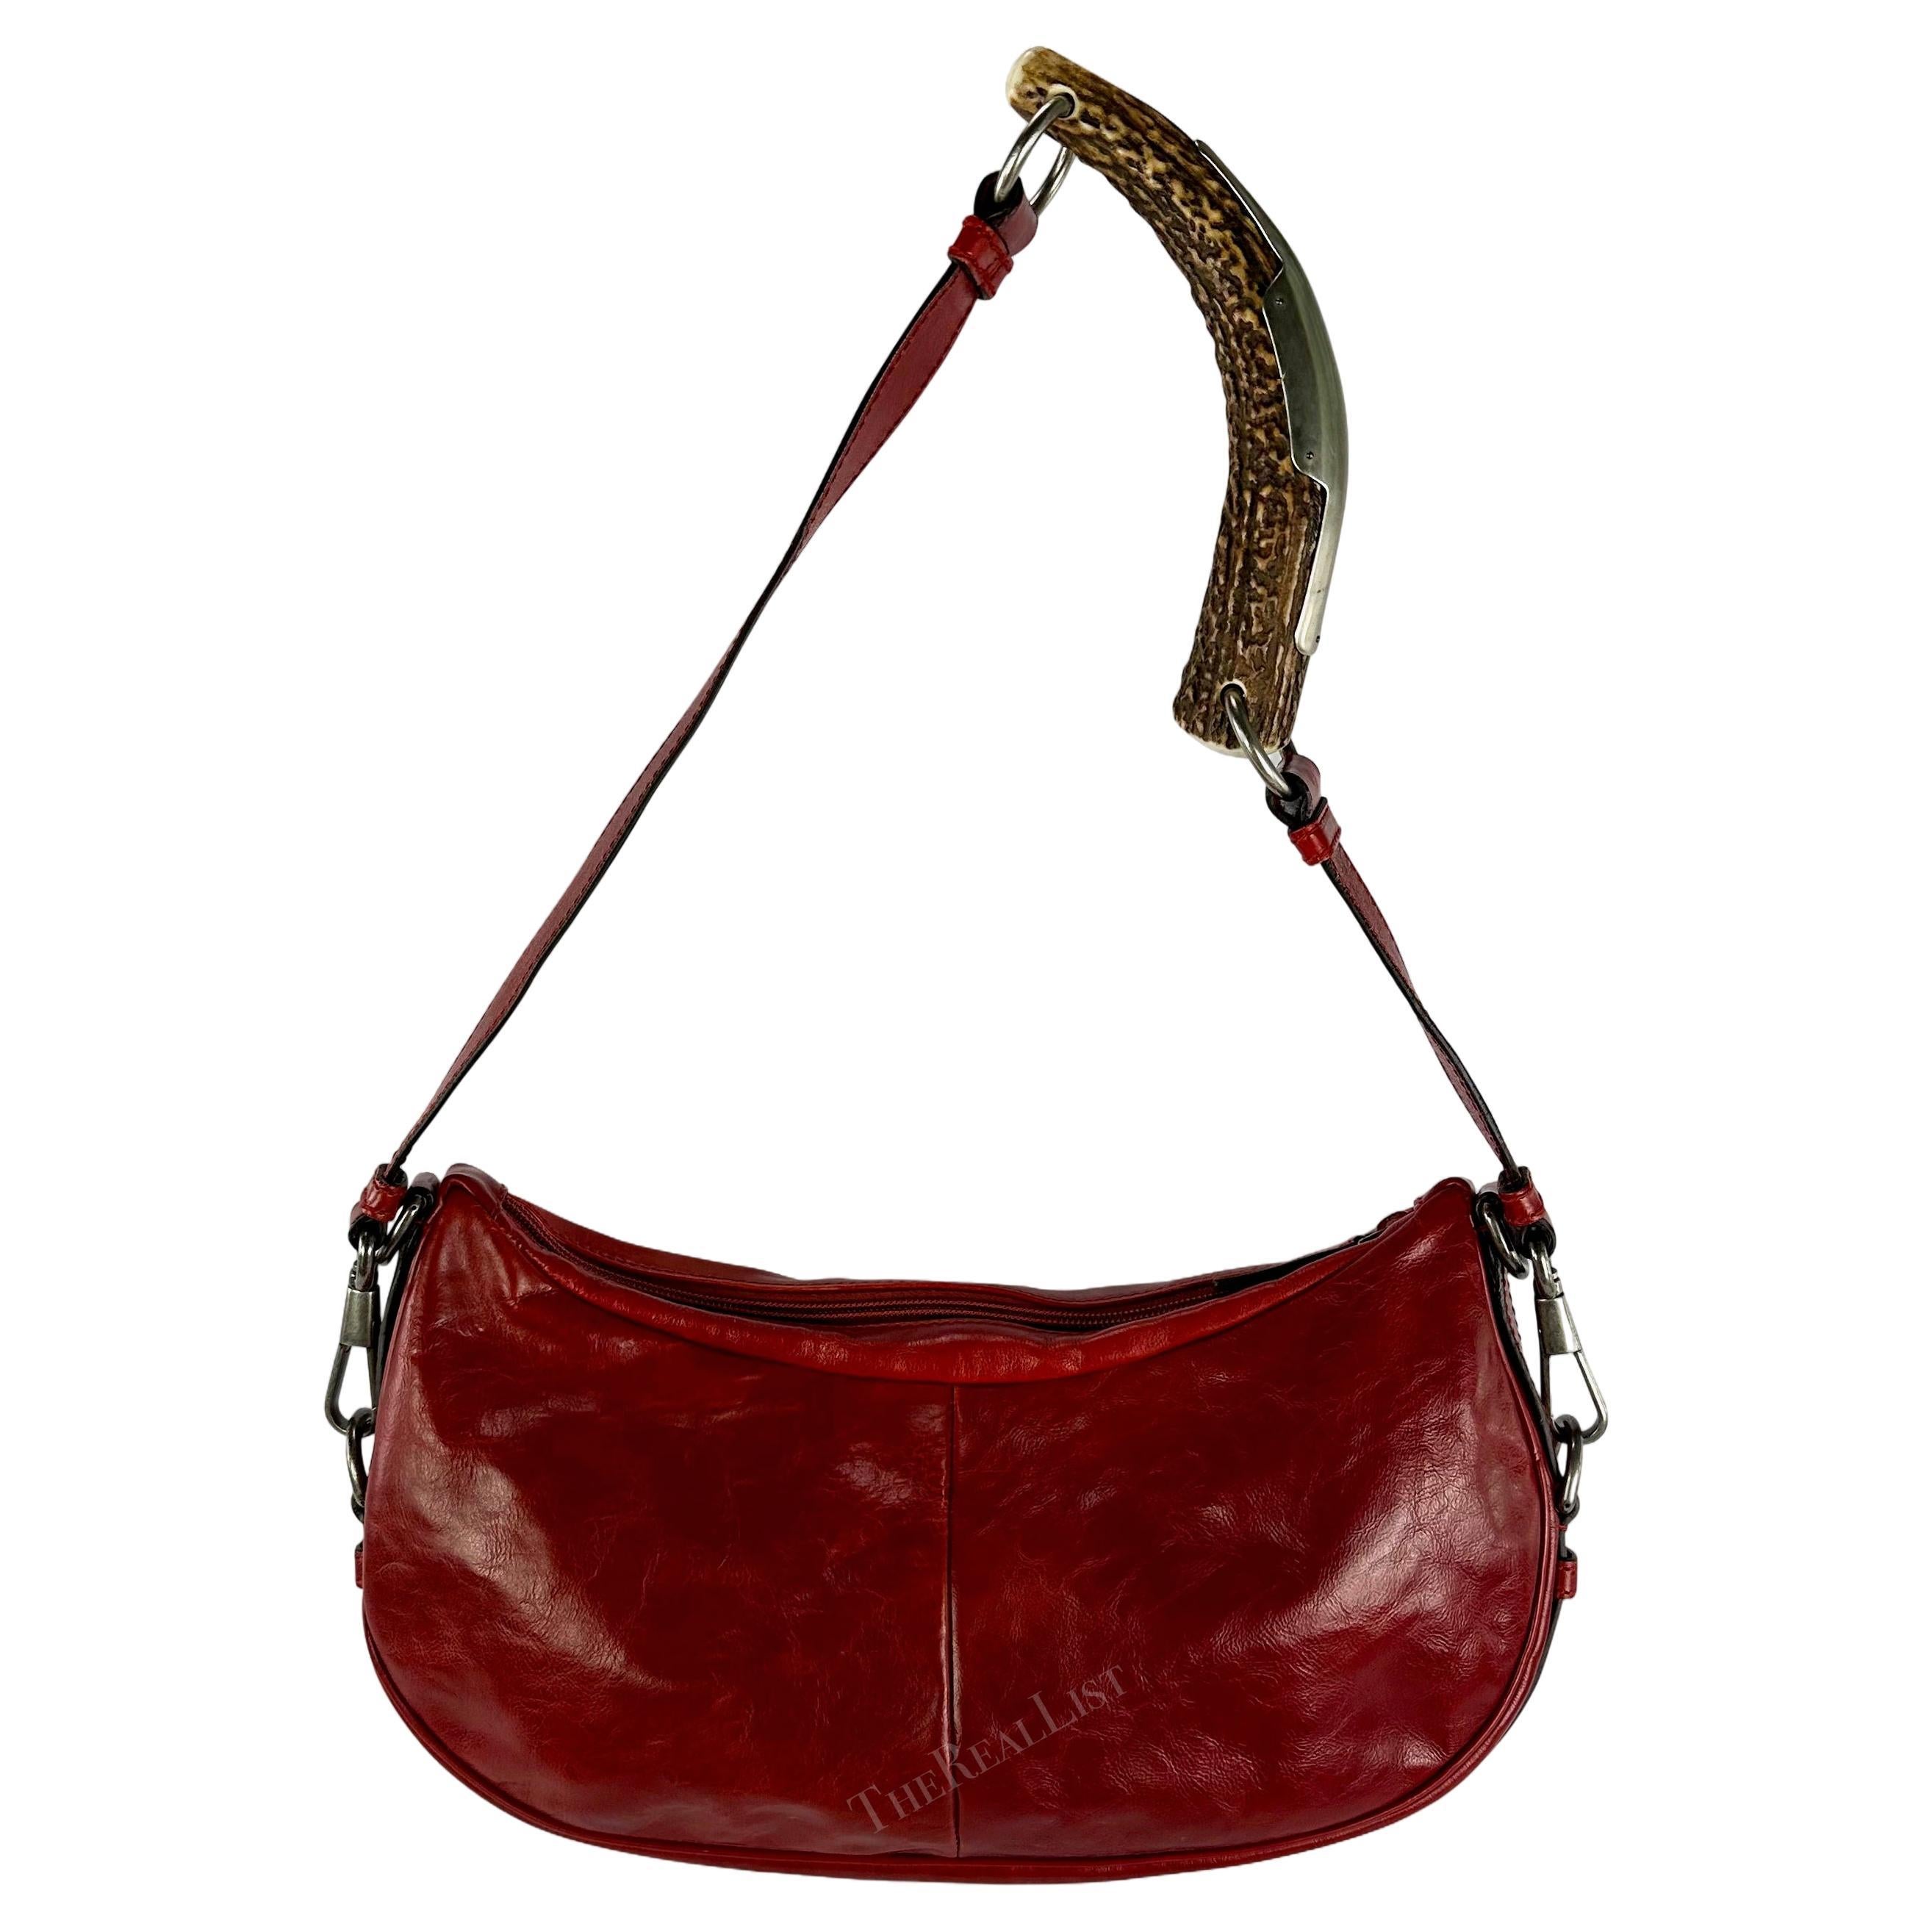 From the early 2000s, this remarkable red leather Yves Saint Laurent Rive Gauche Mombassa style shoulder bag was designed by Tom Ford. Constructed entirely from lightly distressed red leather, it features a distinctive metal-accented horn handle,